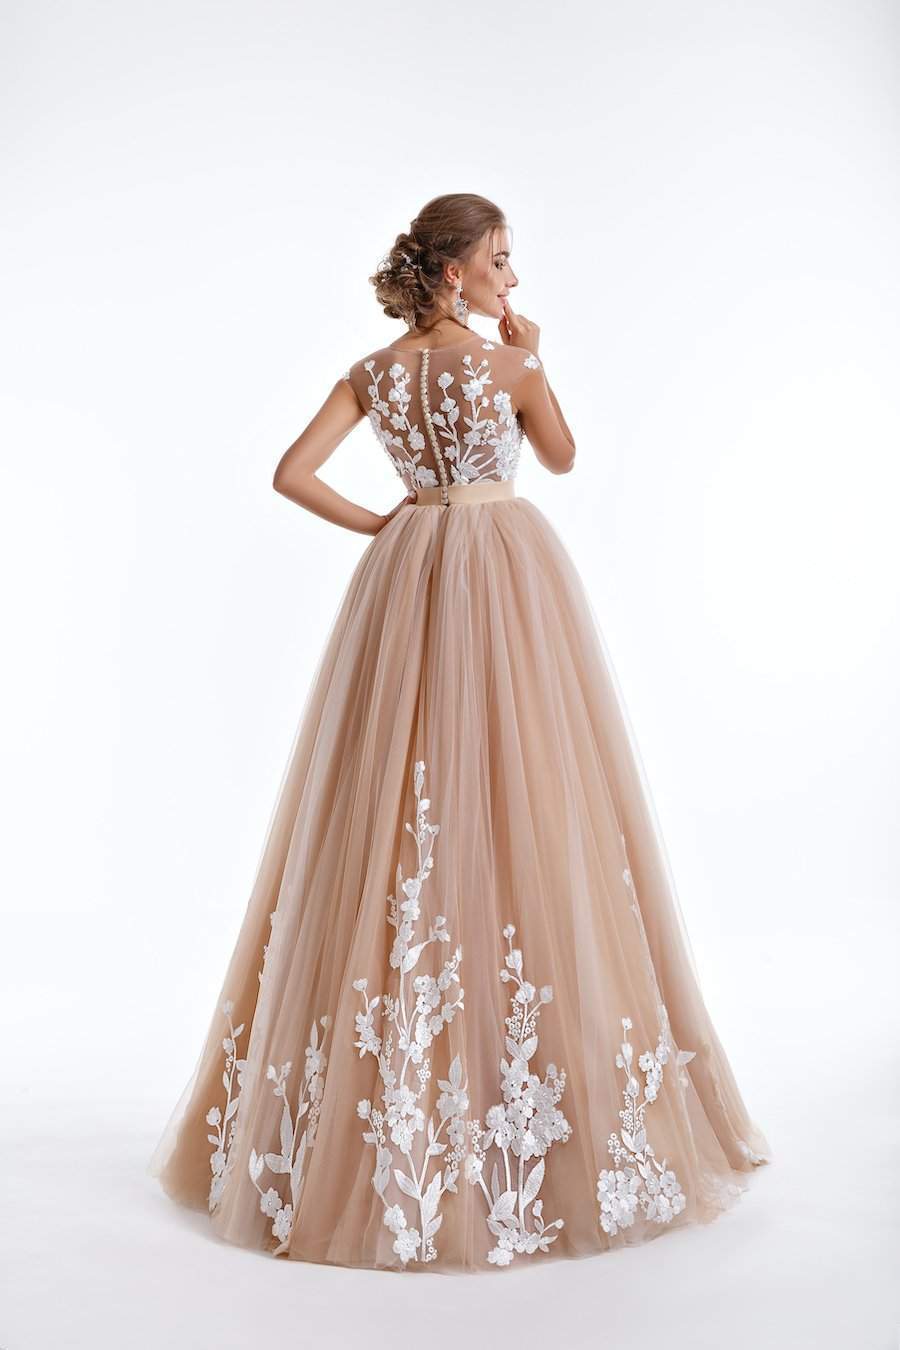 Beige A-Line Wedding Dress with Flowers-A-line,Classic Elegant Gowns,Gold,Royal Wedding Dresses